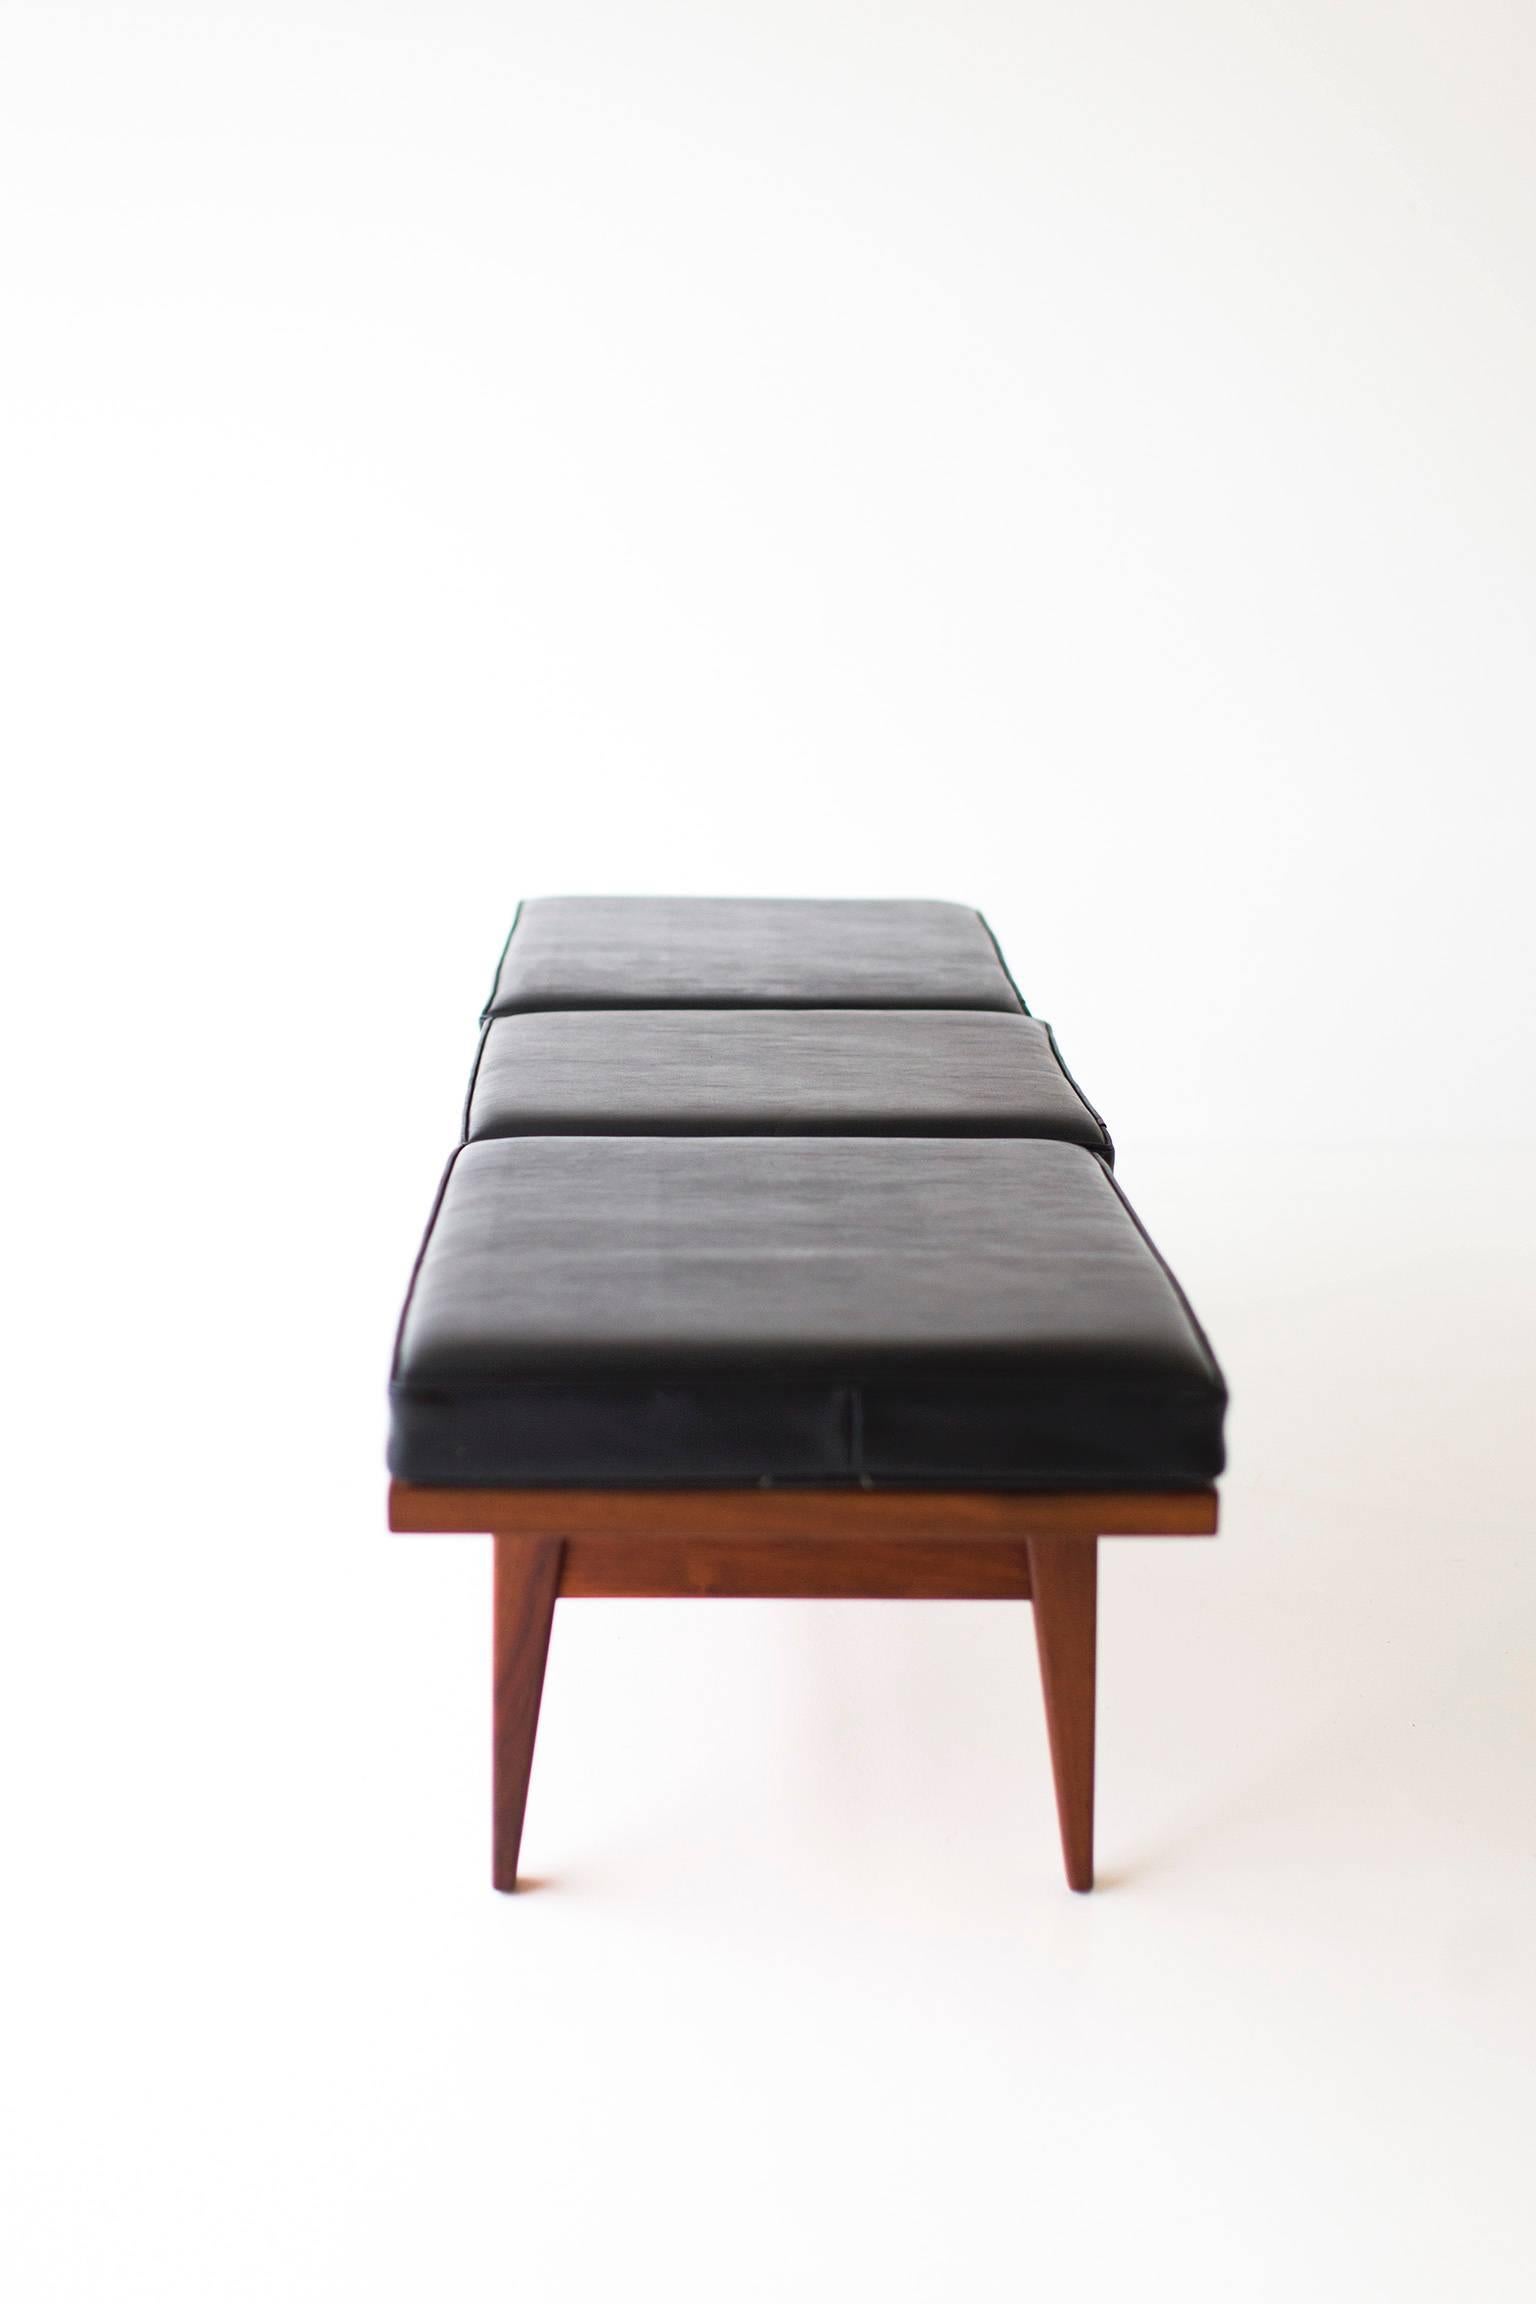 Designer: Jens Risom. 

Manufacturer: Jens Risom Design. 
Period or model: Mid-Century Modern. 
Specs: Walnut, Vinyl. 

Condition: 

This Jens Risom coffee table or bench is in very good original condition. The wood shows normal wear with